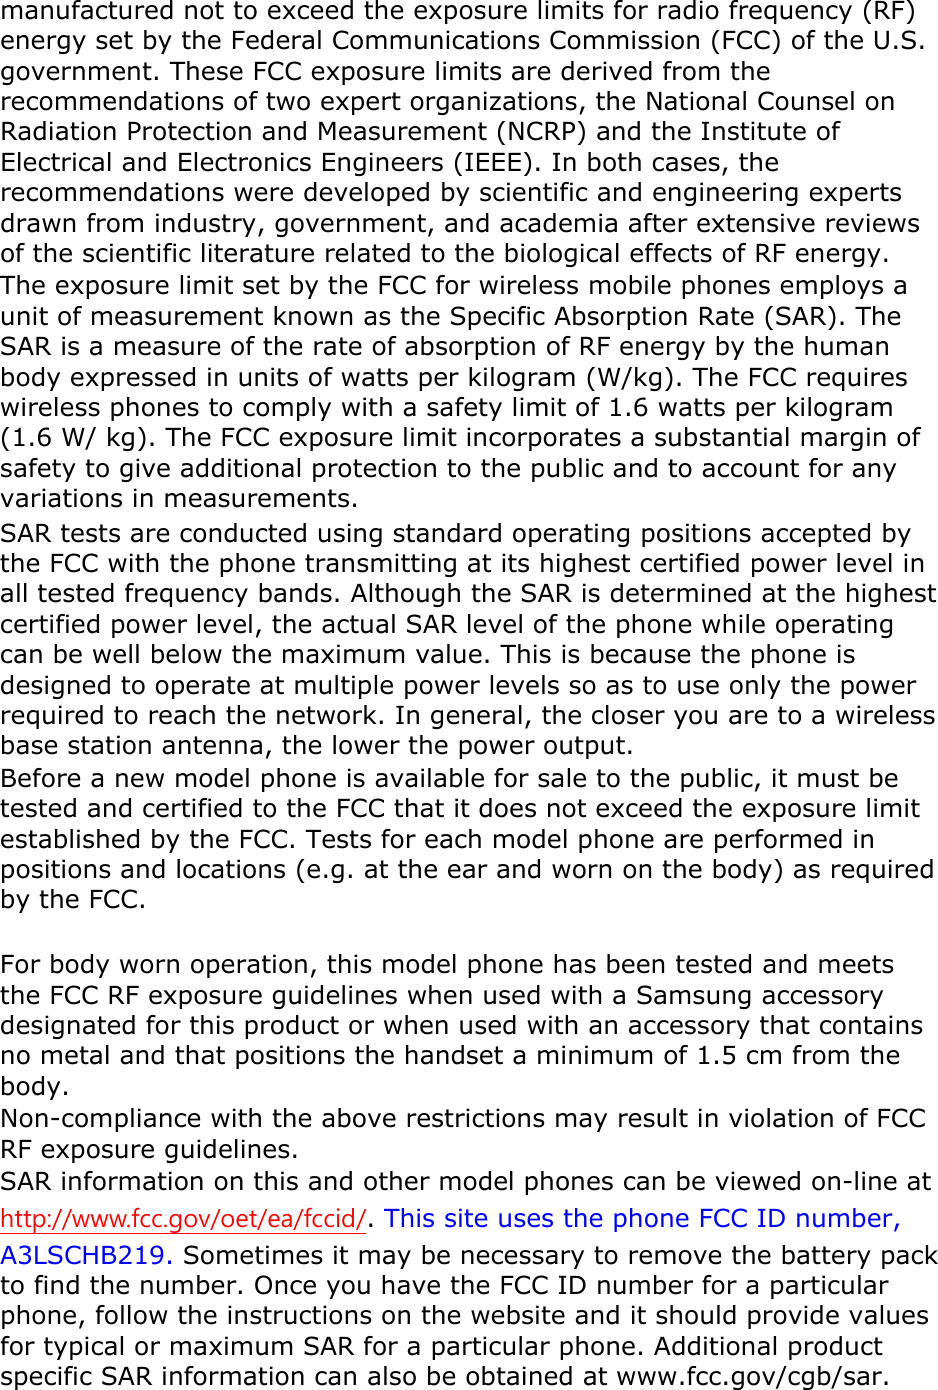 manufactured not to exceed the exposure limits for radio frequency (RF) energy set by the Federal Communications Commission (FCC) of the U.S. government. These FCC exposure limits are derived from the recommendations of two expert organizations, the National Counsel on Radiation Protection and Measurement (NCRP) and the Institute of Electrical and Electronics Engineers (IEEE). In both cases, the recommendations were developed by scientific and engineering experts drawn from industry, government, and academia after extensive reviews of the scientific literature related to the biological effects of RF energy. The exposure limit set by the FCC for wireless mobile phones employs a unit of measurement known as the Specific Absorption Rate (SAR). The SAR is a measure of the rate of absorption of RF energy by the human body expressed in units of watts per kilogram (W/kg). The FCC requires wireless phones to comply with a safety limit of 1.6 watts per kilogram (1.6 W/ kg). The FCC exposure limit incorporates a substantial margin of safety to give additional protection to the public and to account for any variations in measurements. SAR tests are conducted using standard operating positions accepted by the FCC with the phone transmitting at its highest certified power level in all tested frequency bands. Although the SAR is determined at the highest certified power level, the actual SAR level of the phone while operating can be well below the maximum value. This is because the phone is designed to operate at multiple power levels so as to use only the power required to reach the network. In general, the closer you are to a wireless base station antenna, the lower the power output. Before a new model phone is available for sale to the public, it must be tested and certified to the FCC that it does not exceed the exposure limit established by the FCC. Tests for each model phone are performed in positions and locations (e.g. at the ear and worn on the body) as required by the FCC.      For body worn operation, this model phone has been tested and meets the FCC RF exposure guidelines when used with a Samsung accessory designated for this product or when used with an accessory that contains no metal and that positions the handset a minimum of 1.5 cm from the body.  Non-compliance with the above restrictions may result in violation of FCC RF exposure guidelines. SAR information on this and other model phones can be viewed on-line at http://www.fcc.gov/oet/ea/fccid/. This site uses the phone FCC ID number, A3LSCHB219. Sometimes it may be necessary to remove the battery pack to find the number. Once you have the FCC ID number for a particular phone, follow the instructions on the website and it should provide values for typical or maximum SAR for a particular phone. Additional product specific SAR information can also be obtained at www.fcc.gov/cgb/sar. 